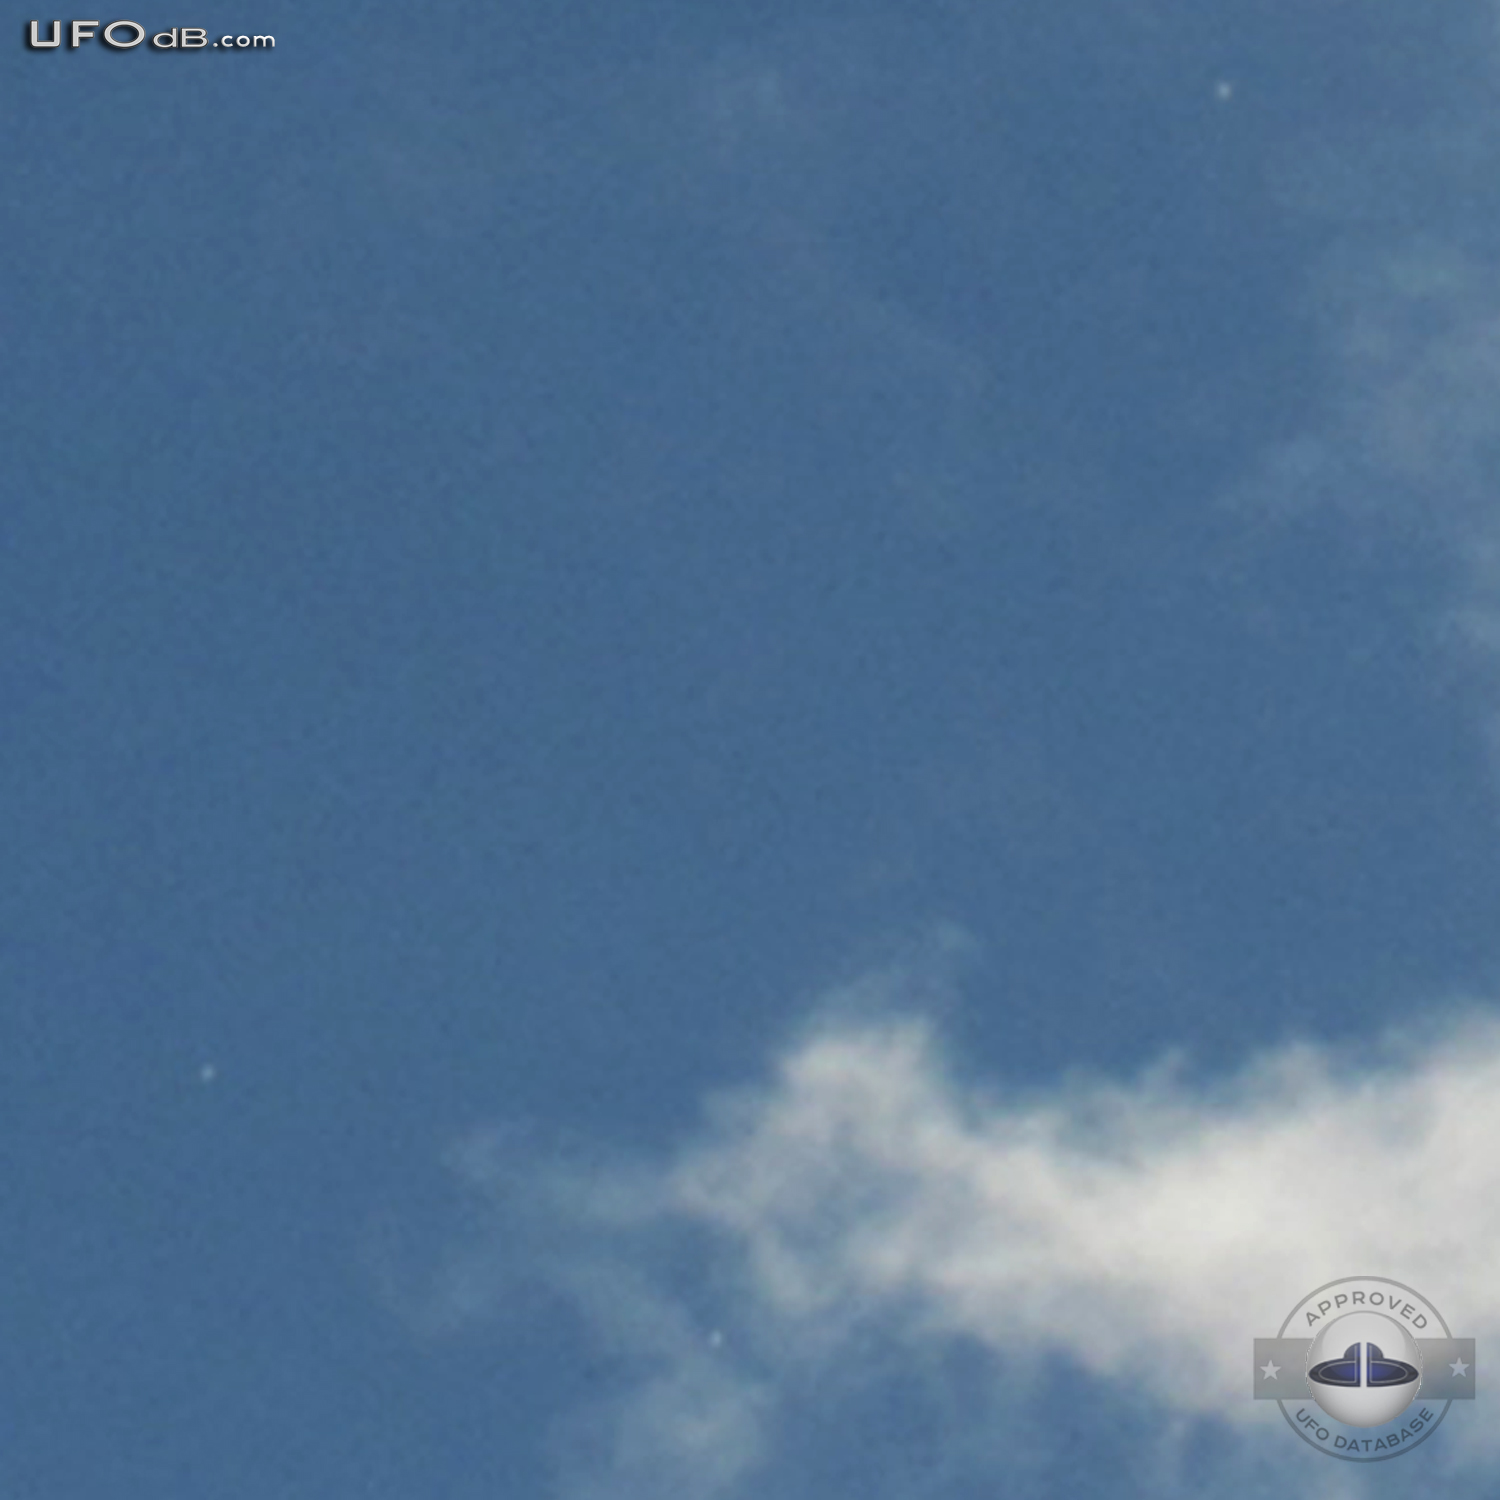 White disc UFOs hides behind clouds Davao Philippines November 3 2010 UFO Picture #340-4